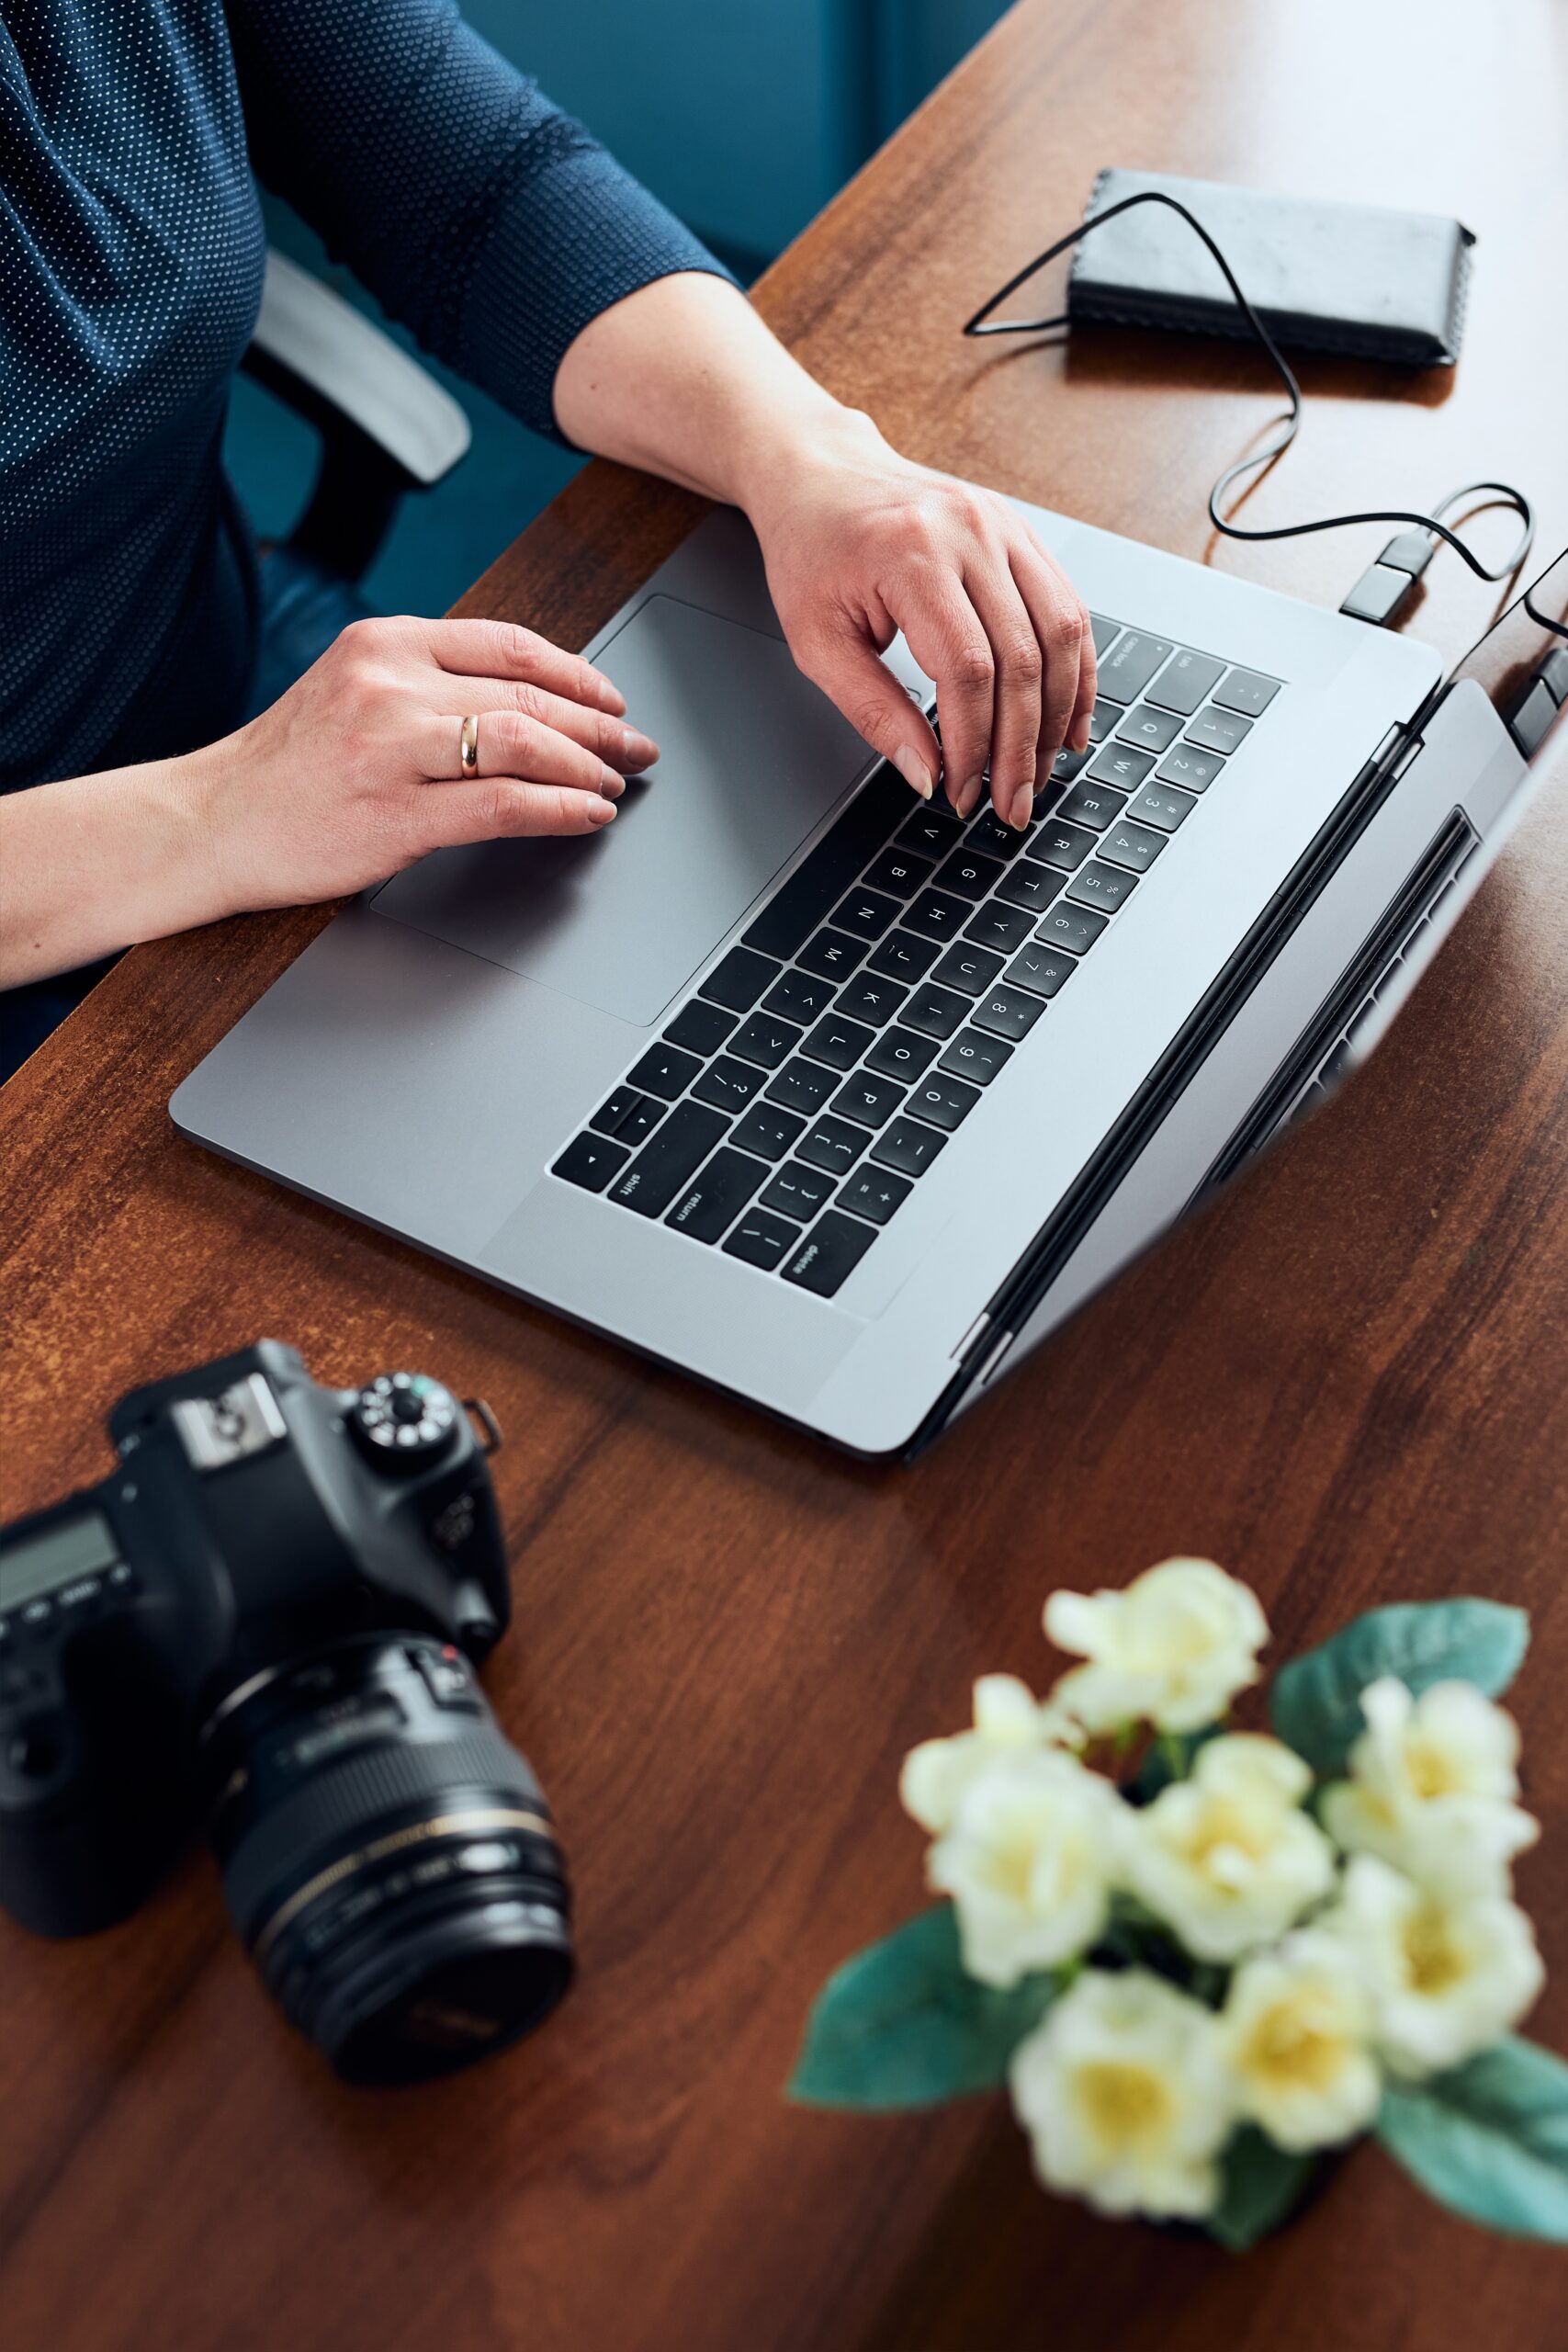 Female working on laptop and camera